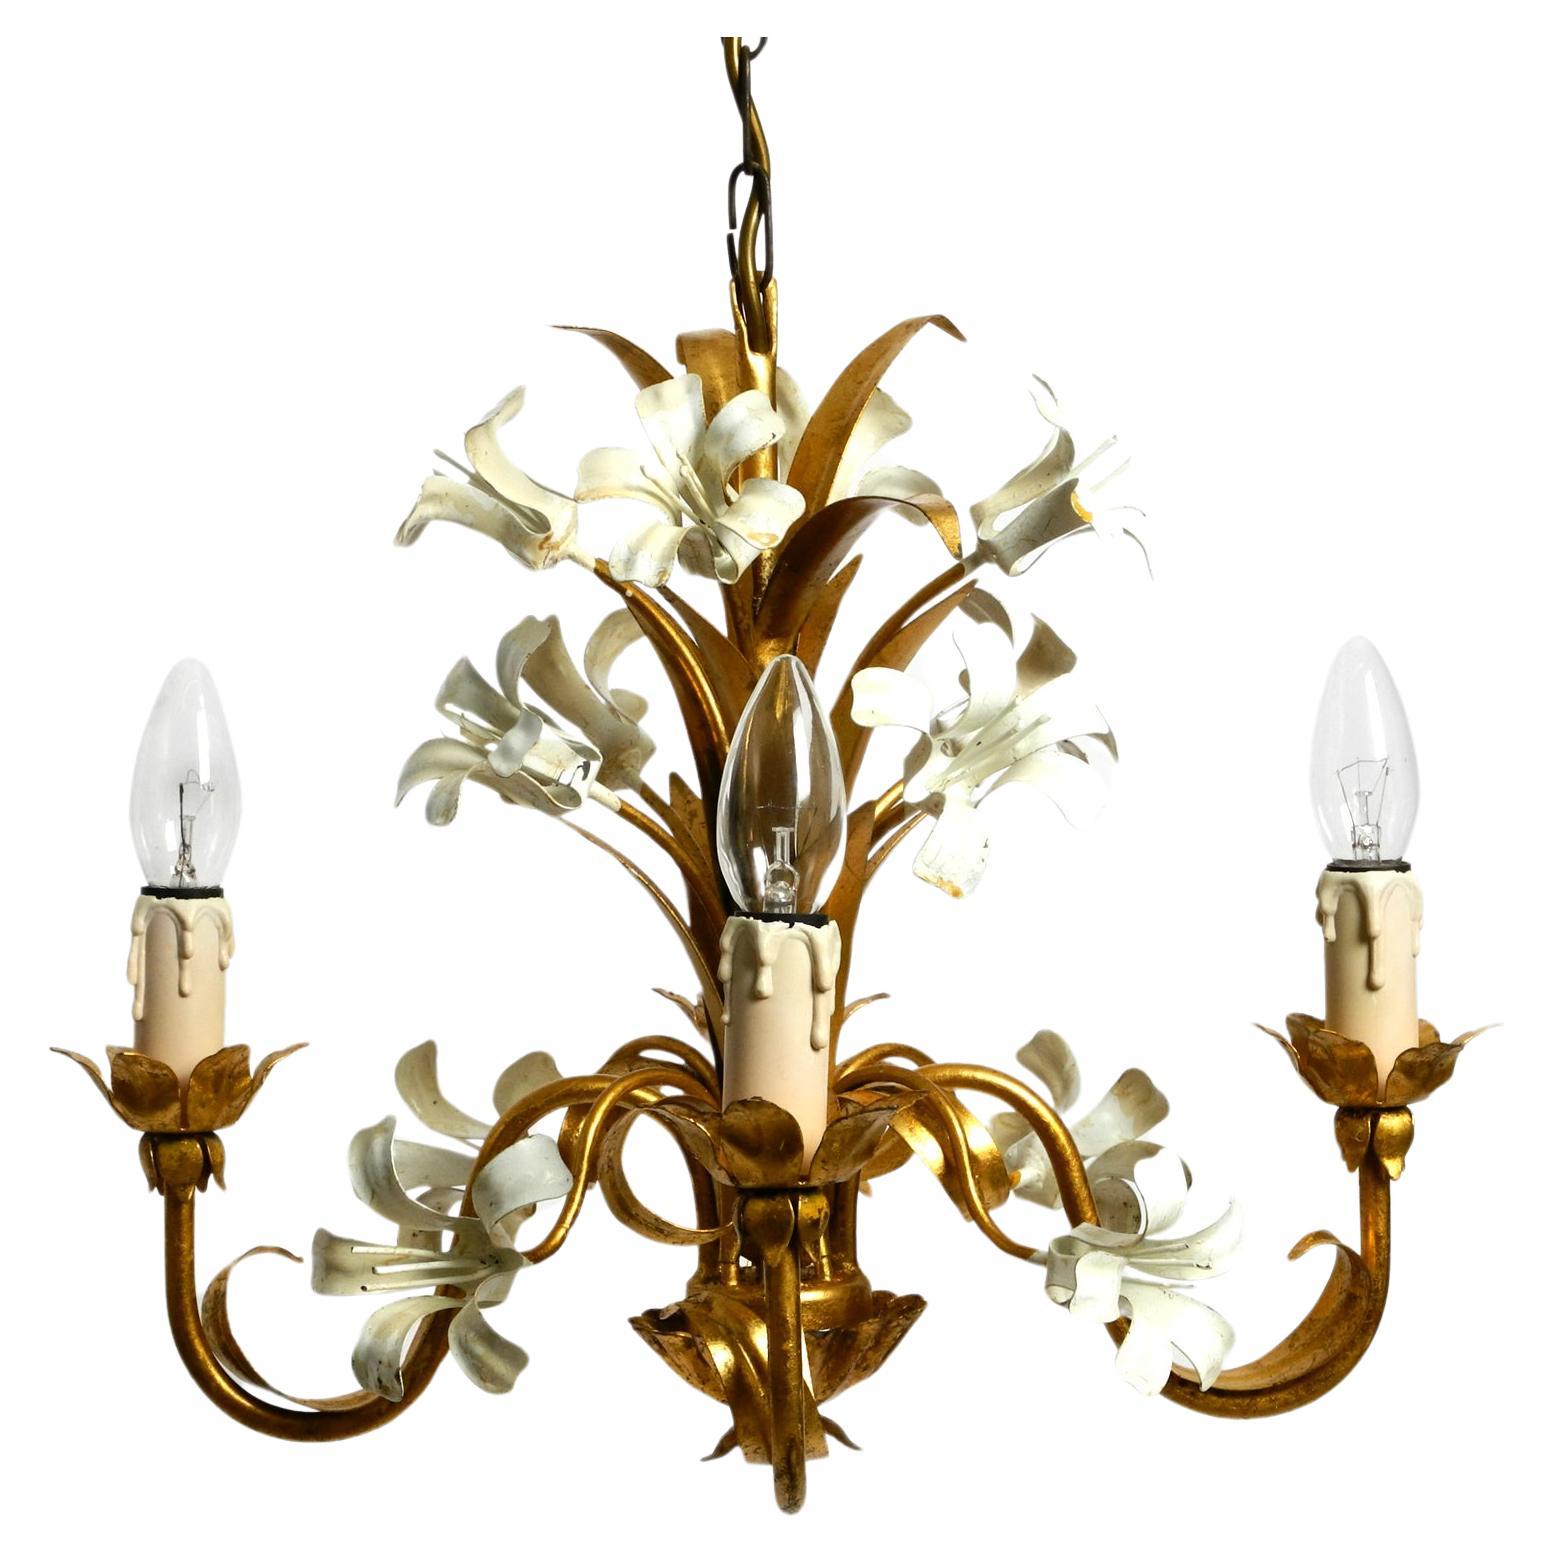 Small beautiful 1960s gold-plated 4-arm metal chandelier